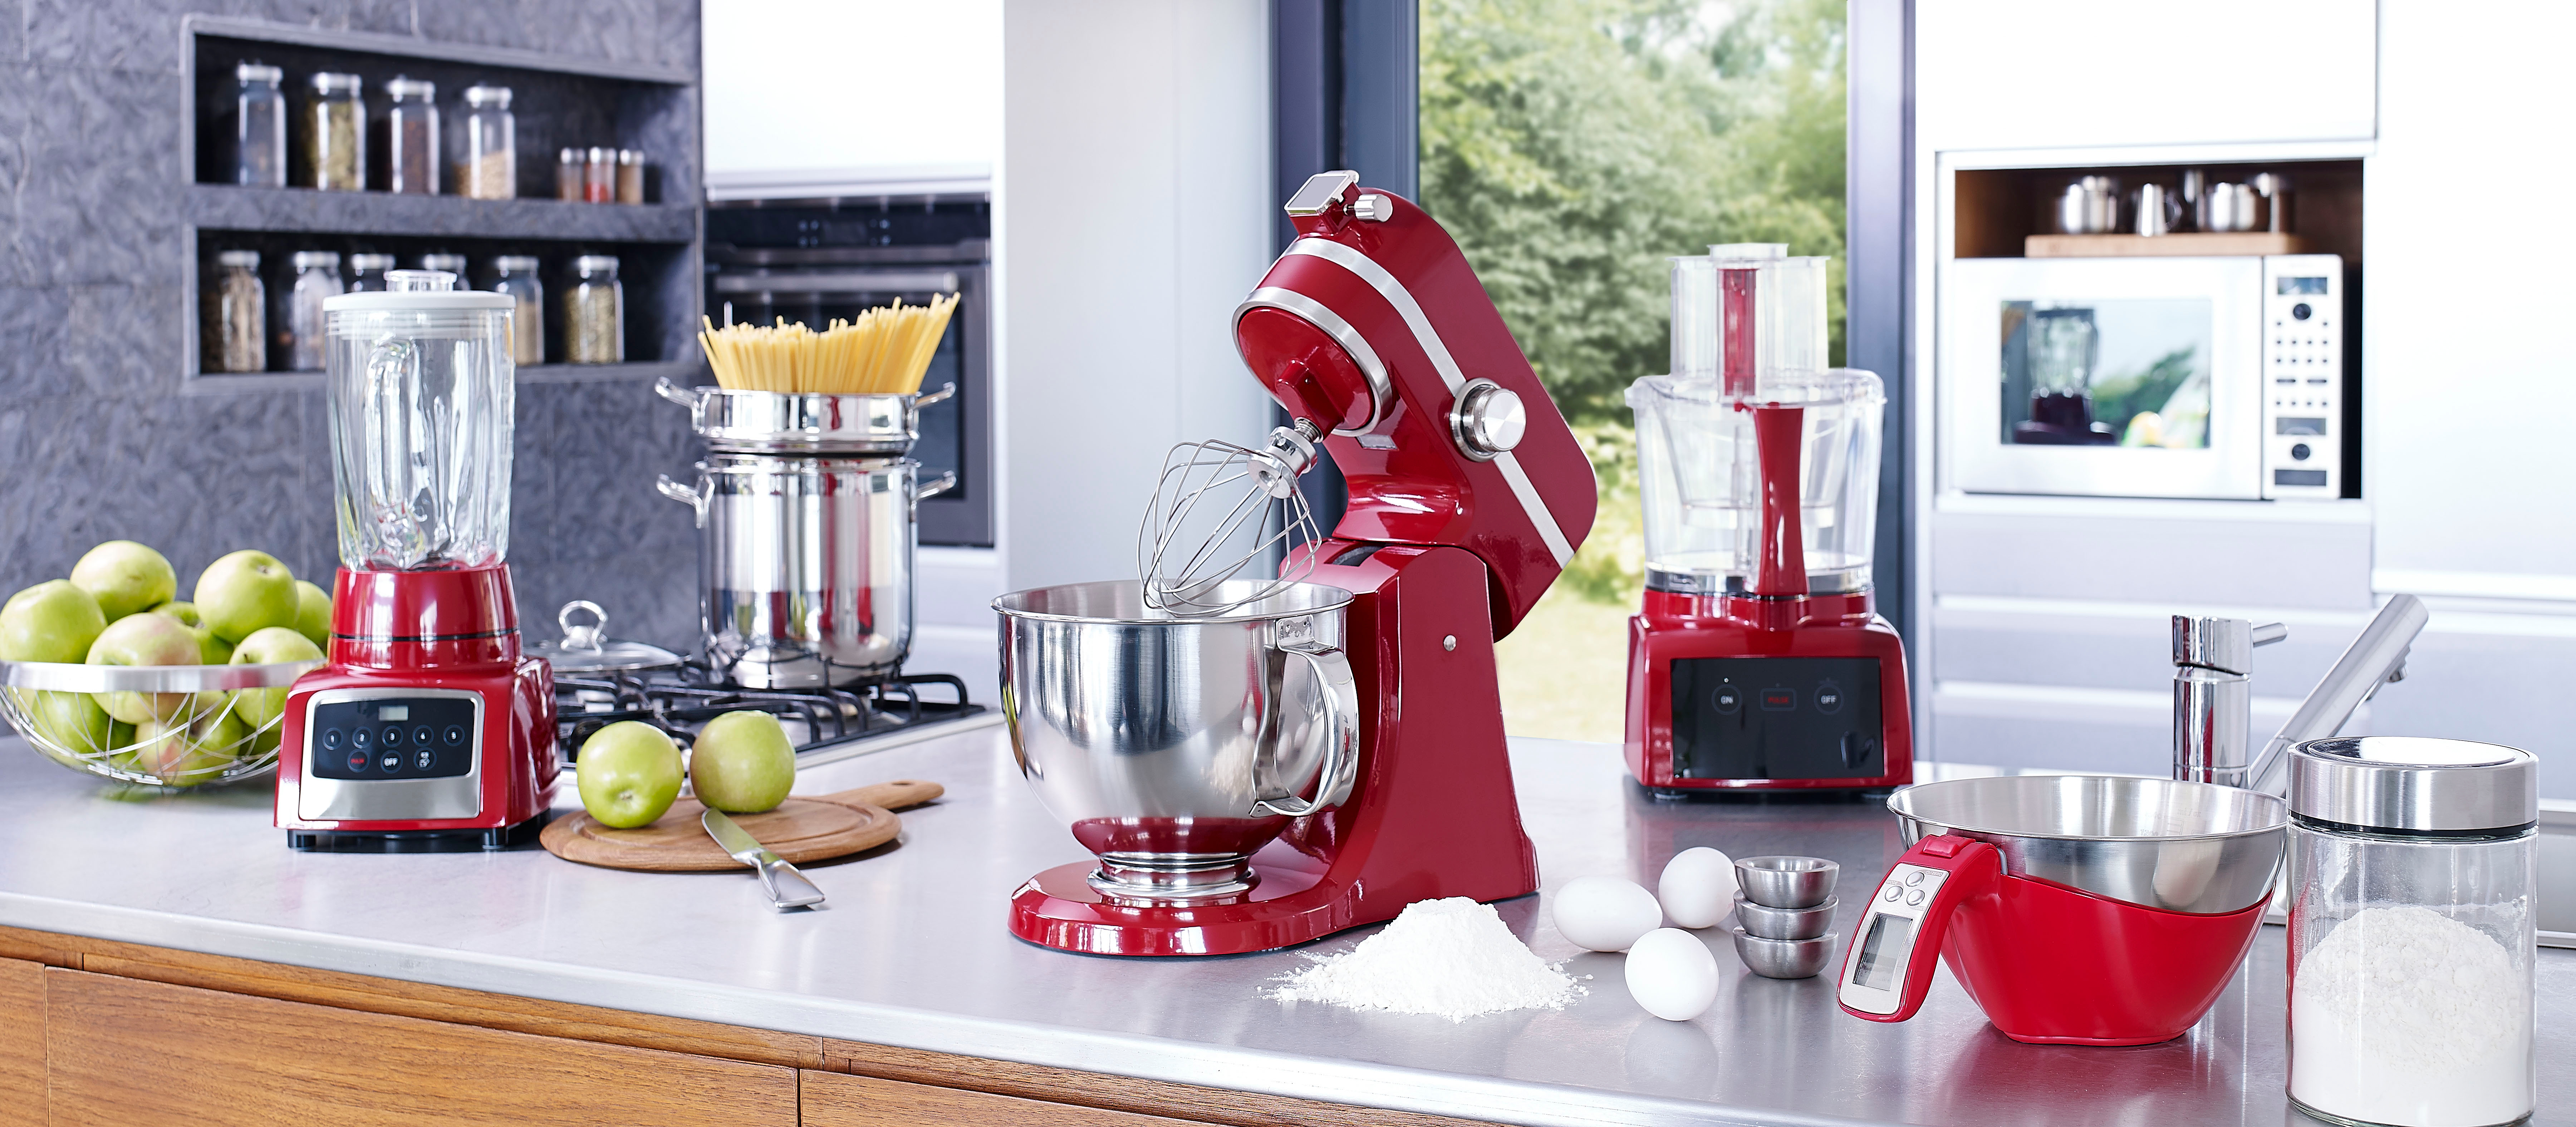 4 small appliances that need extended warranty coverage